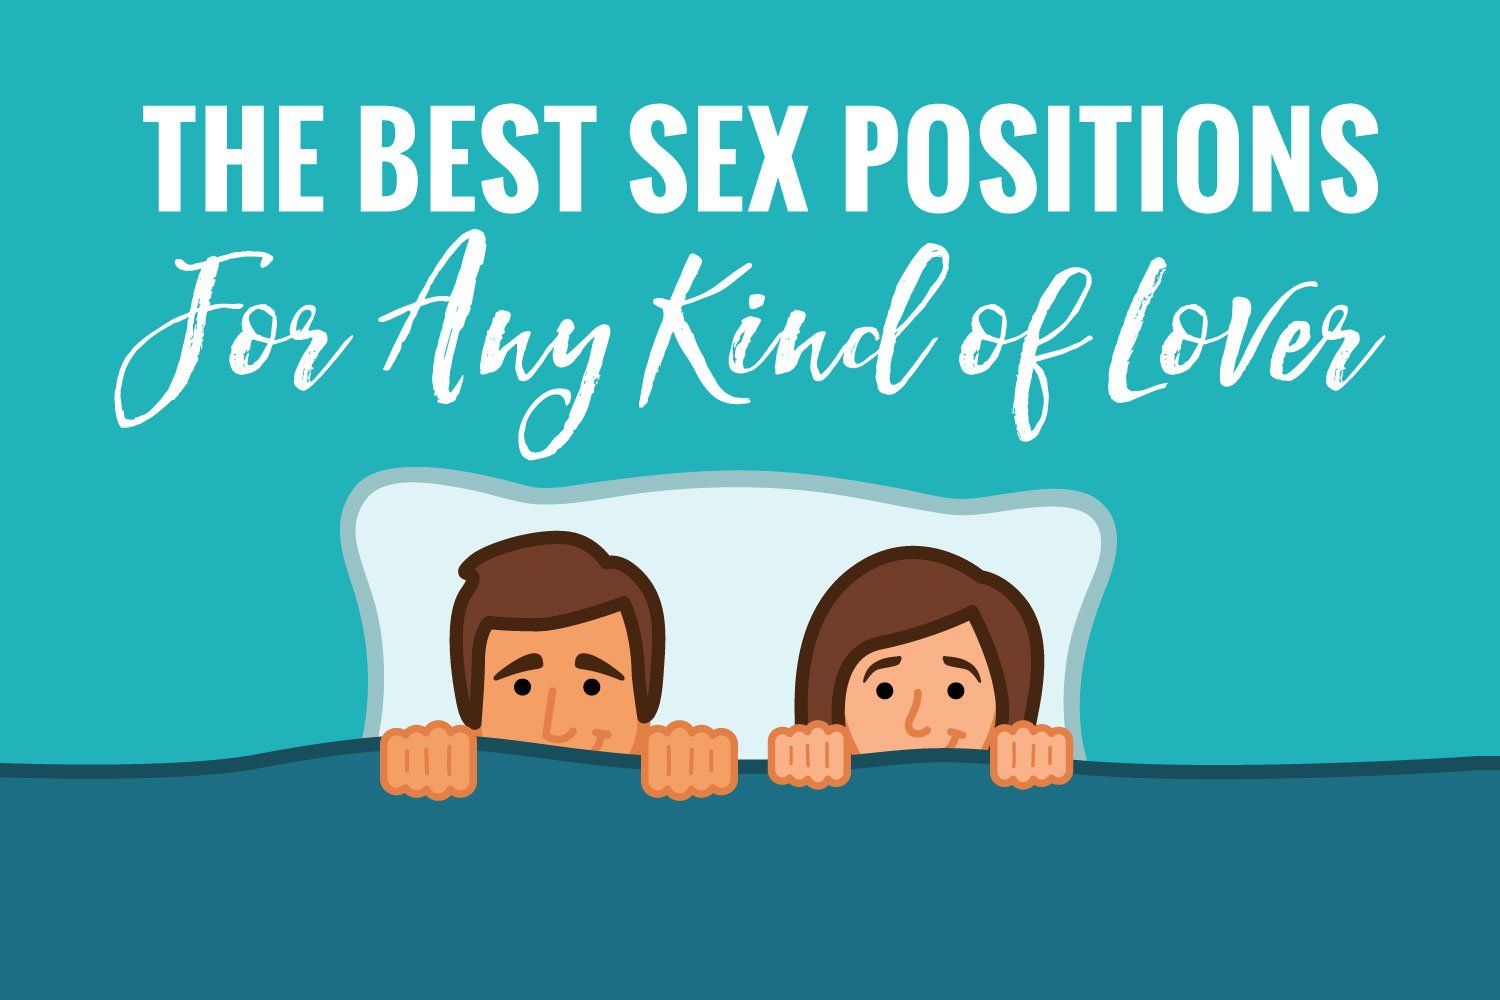 Which sex position hurts more